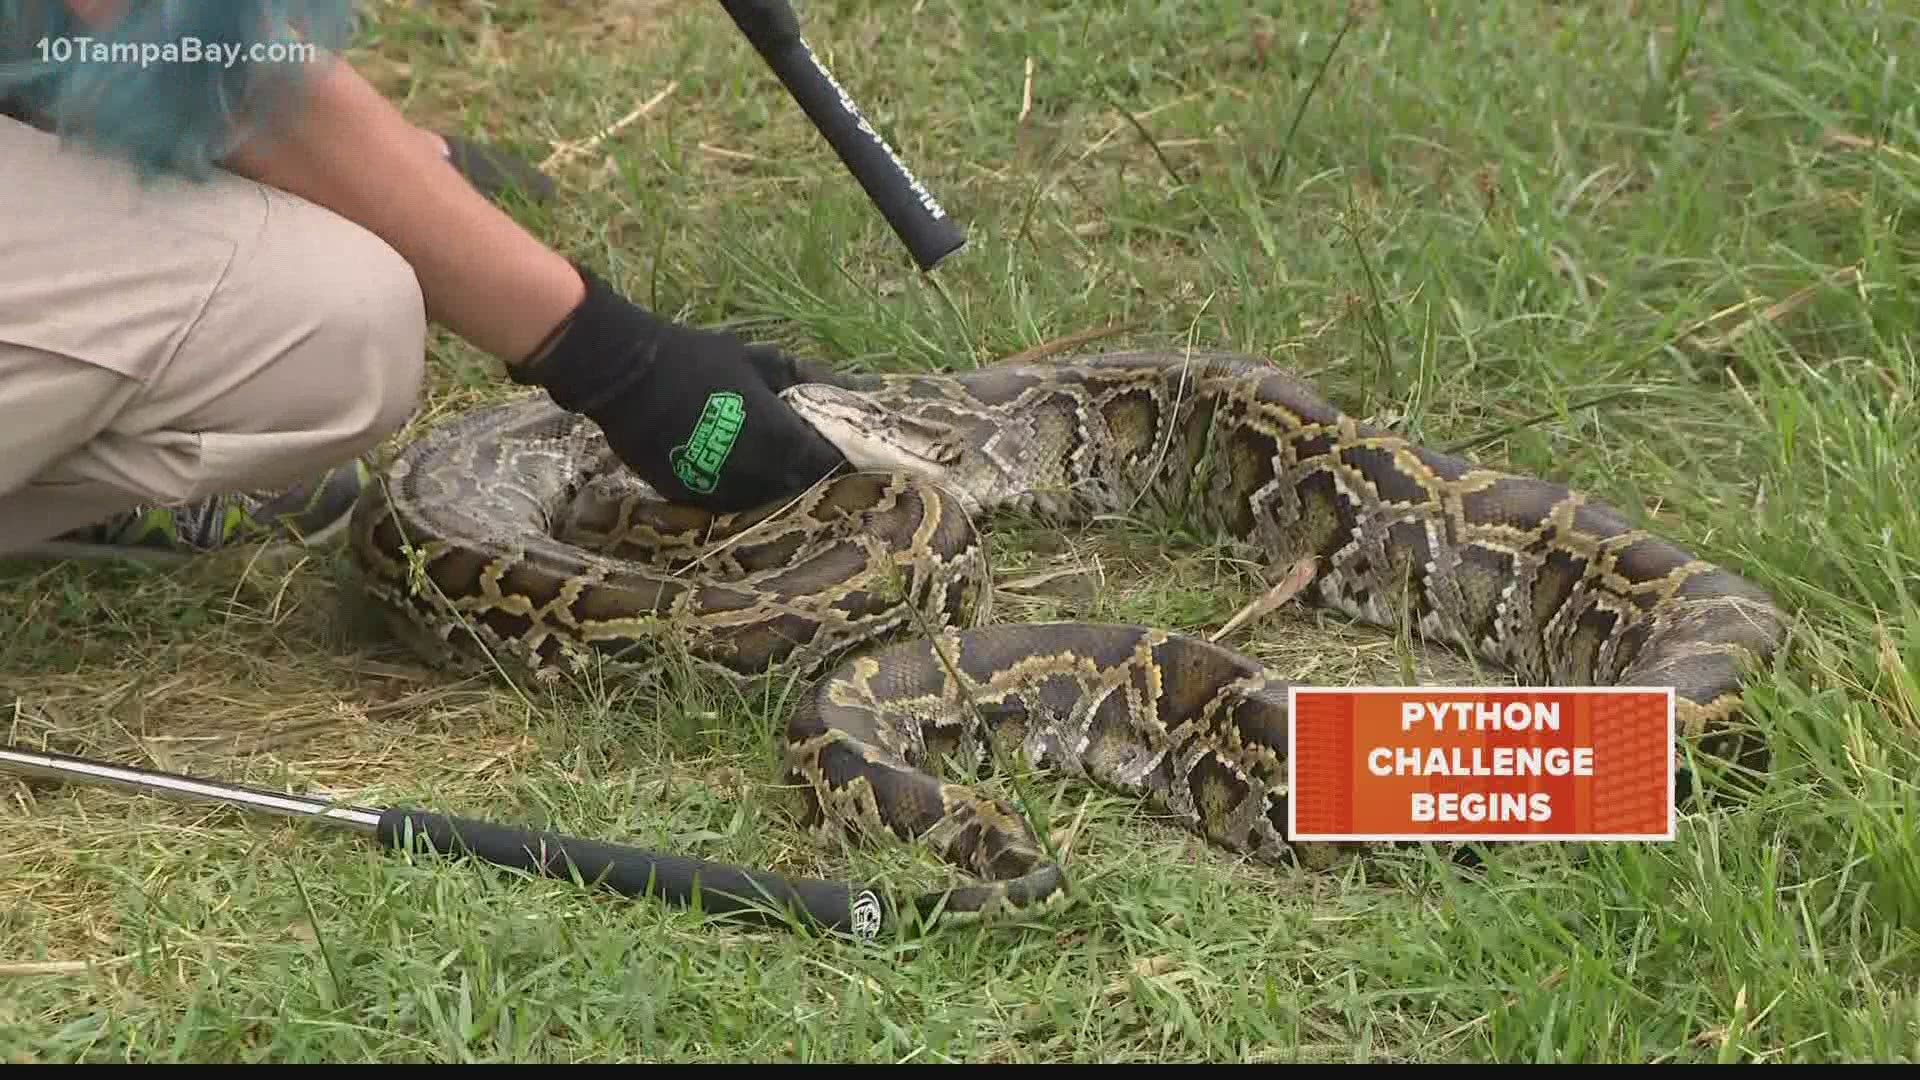 The goal of the challenge is to raise awareness about the invasive snake species and the threats they can pose to the state's ecology.